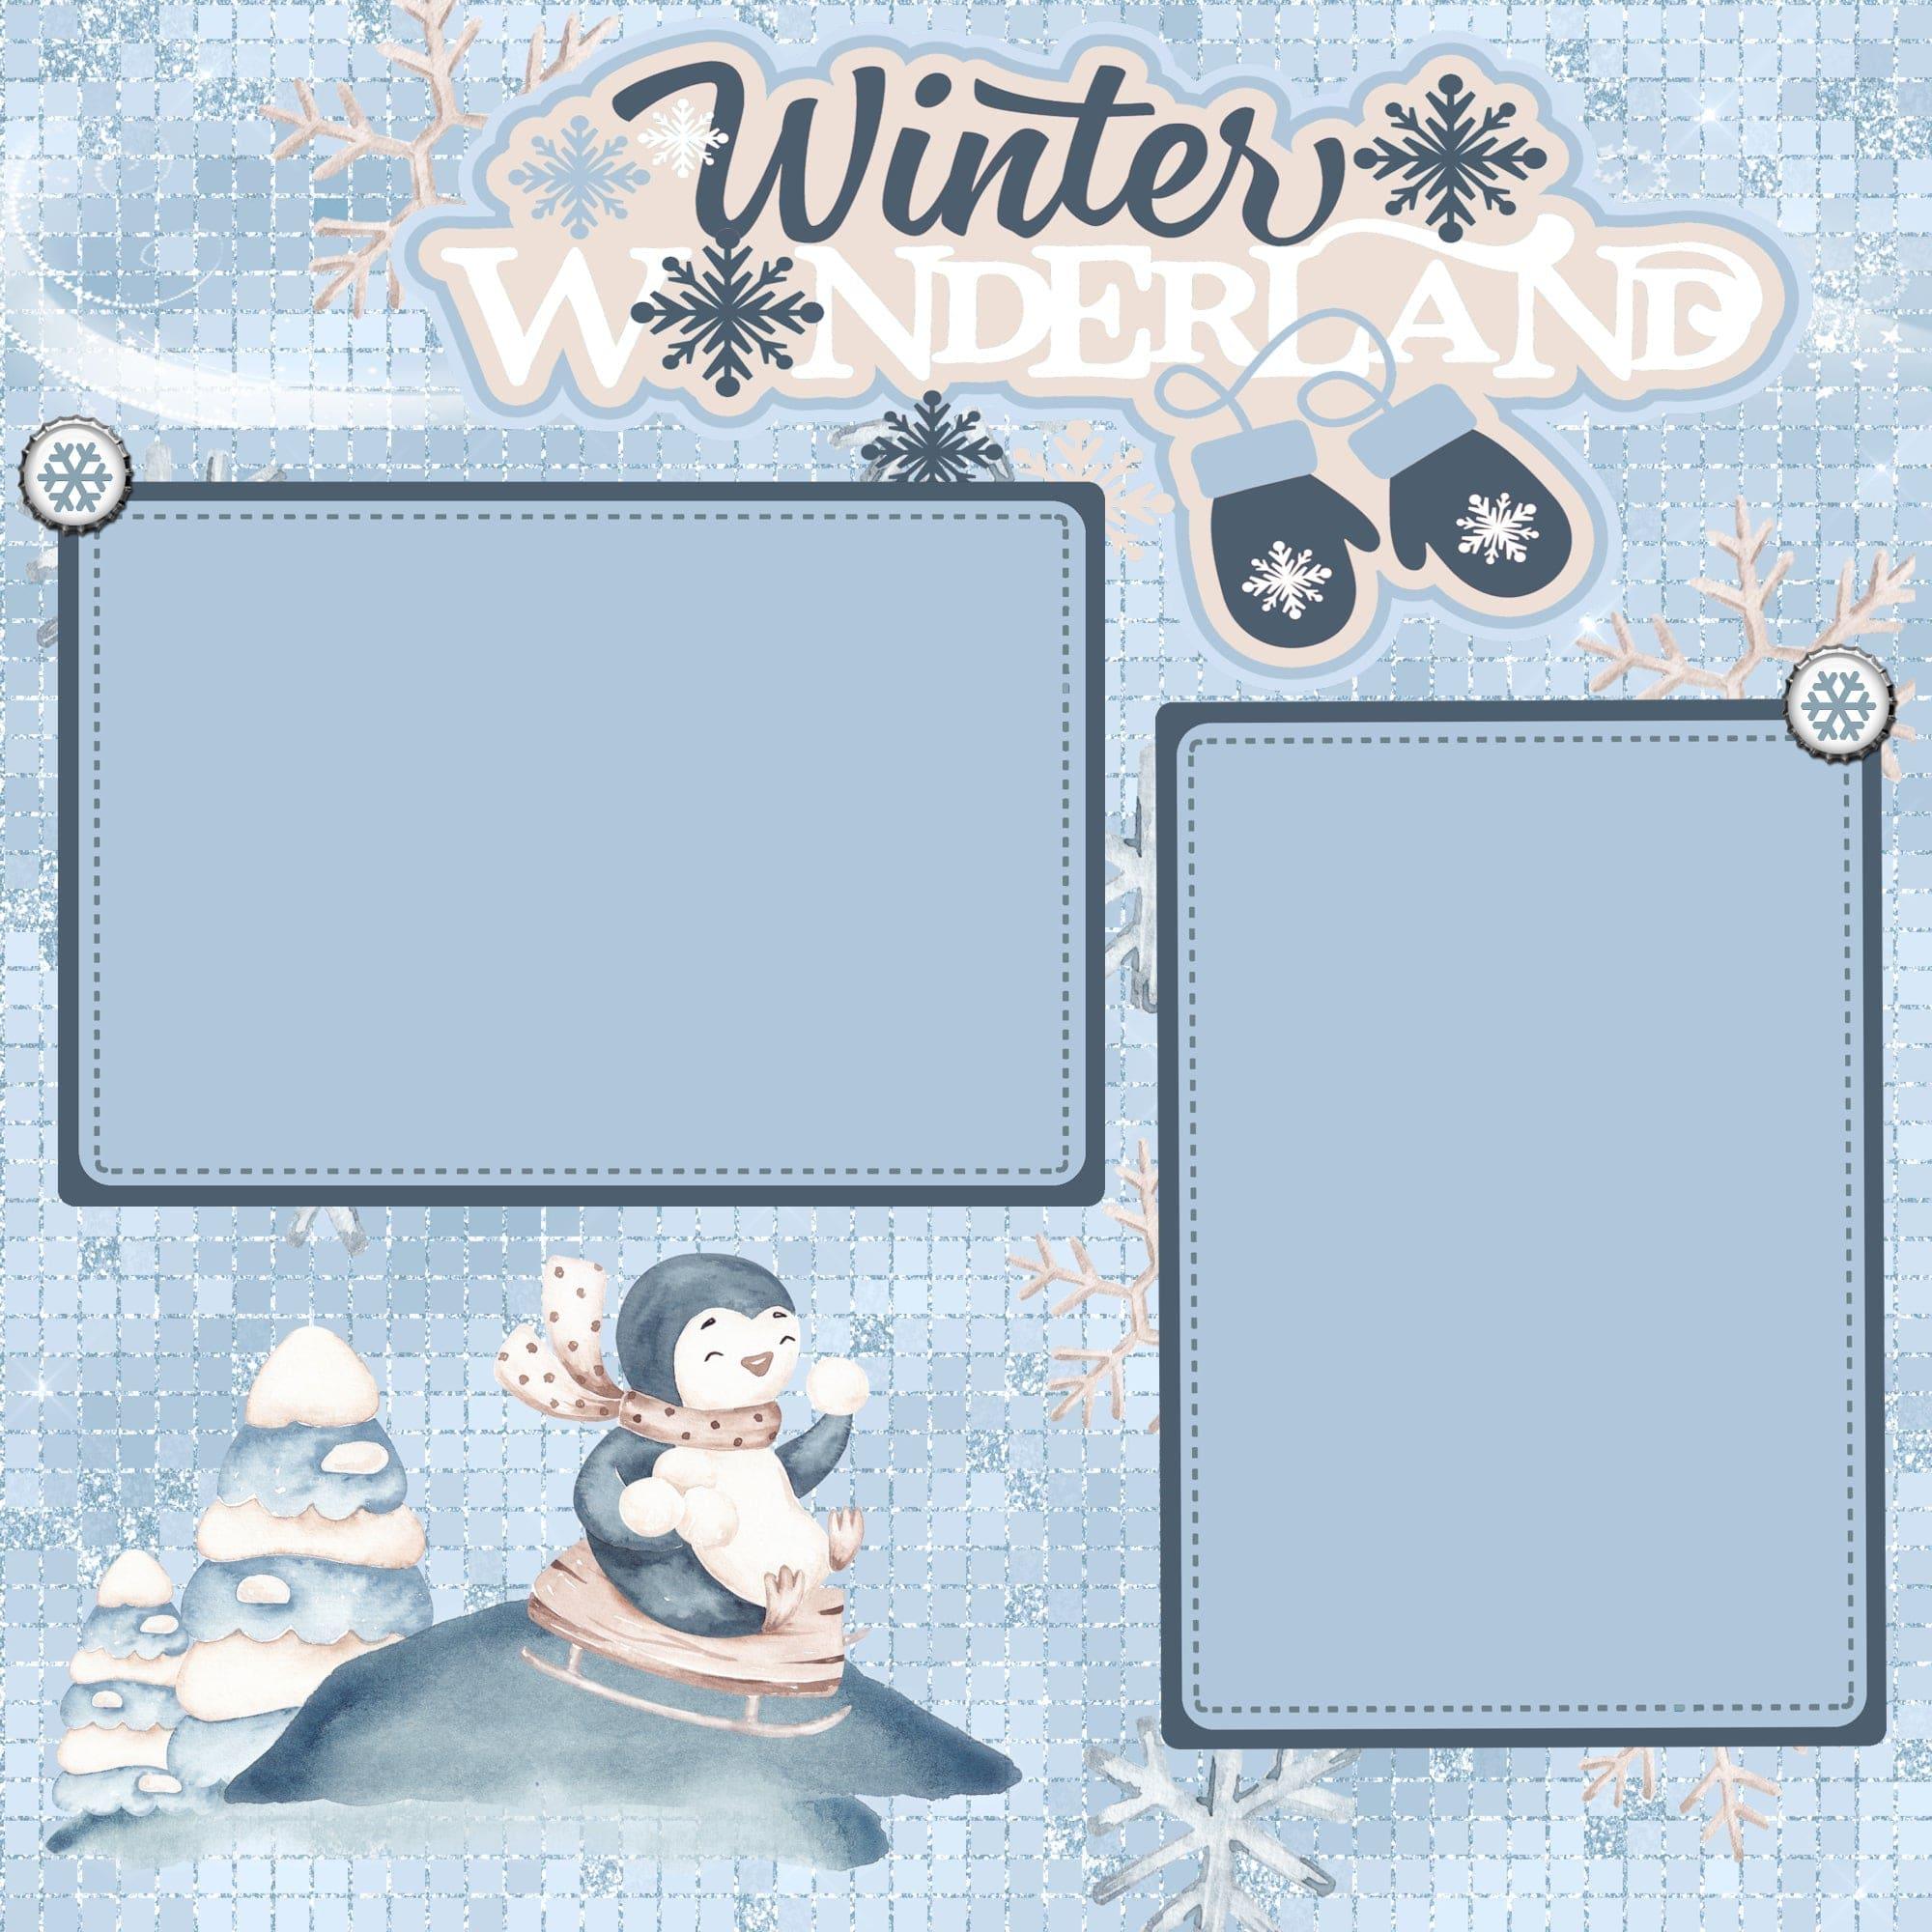 Winter Wonderland Playful Penguins (2) - 12 x 12 Premade, Printed Scrapbook Pages by SSC Designs - Scrapbook Supply Companies